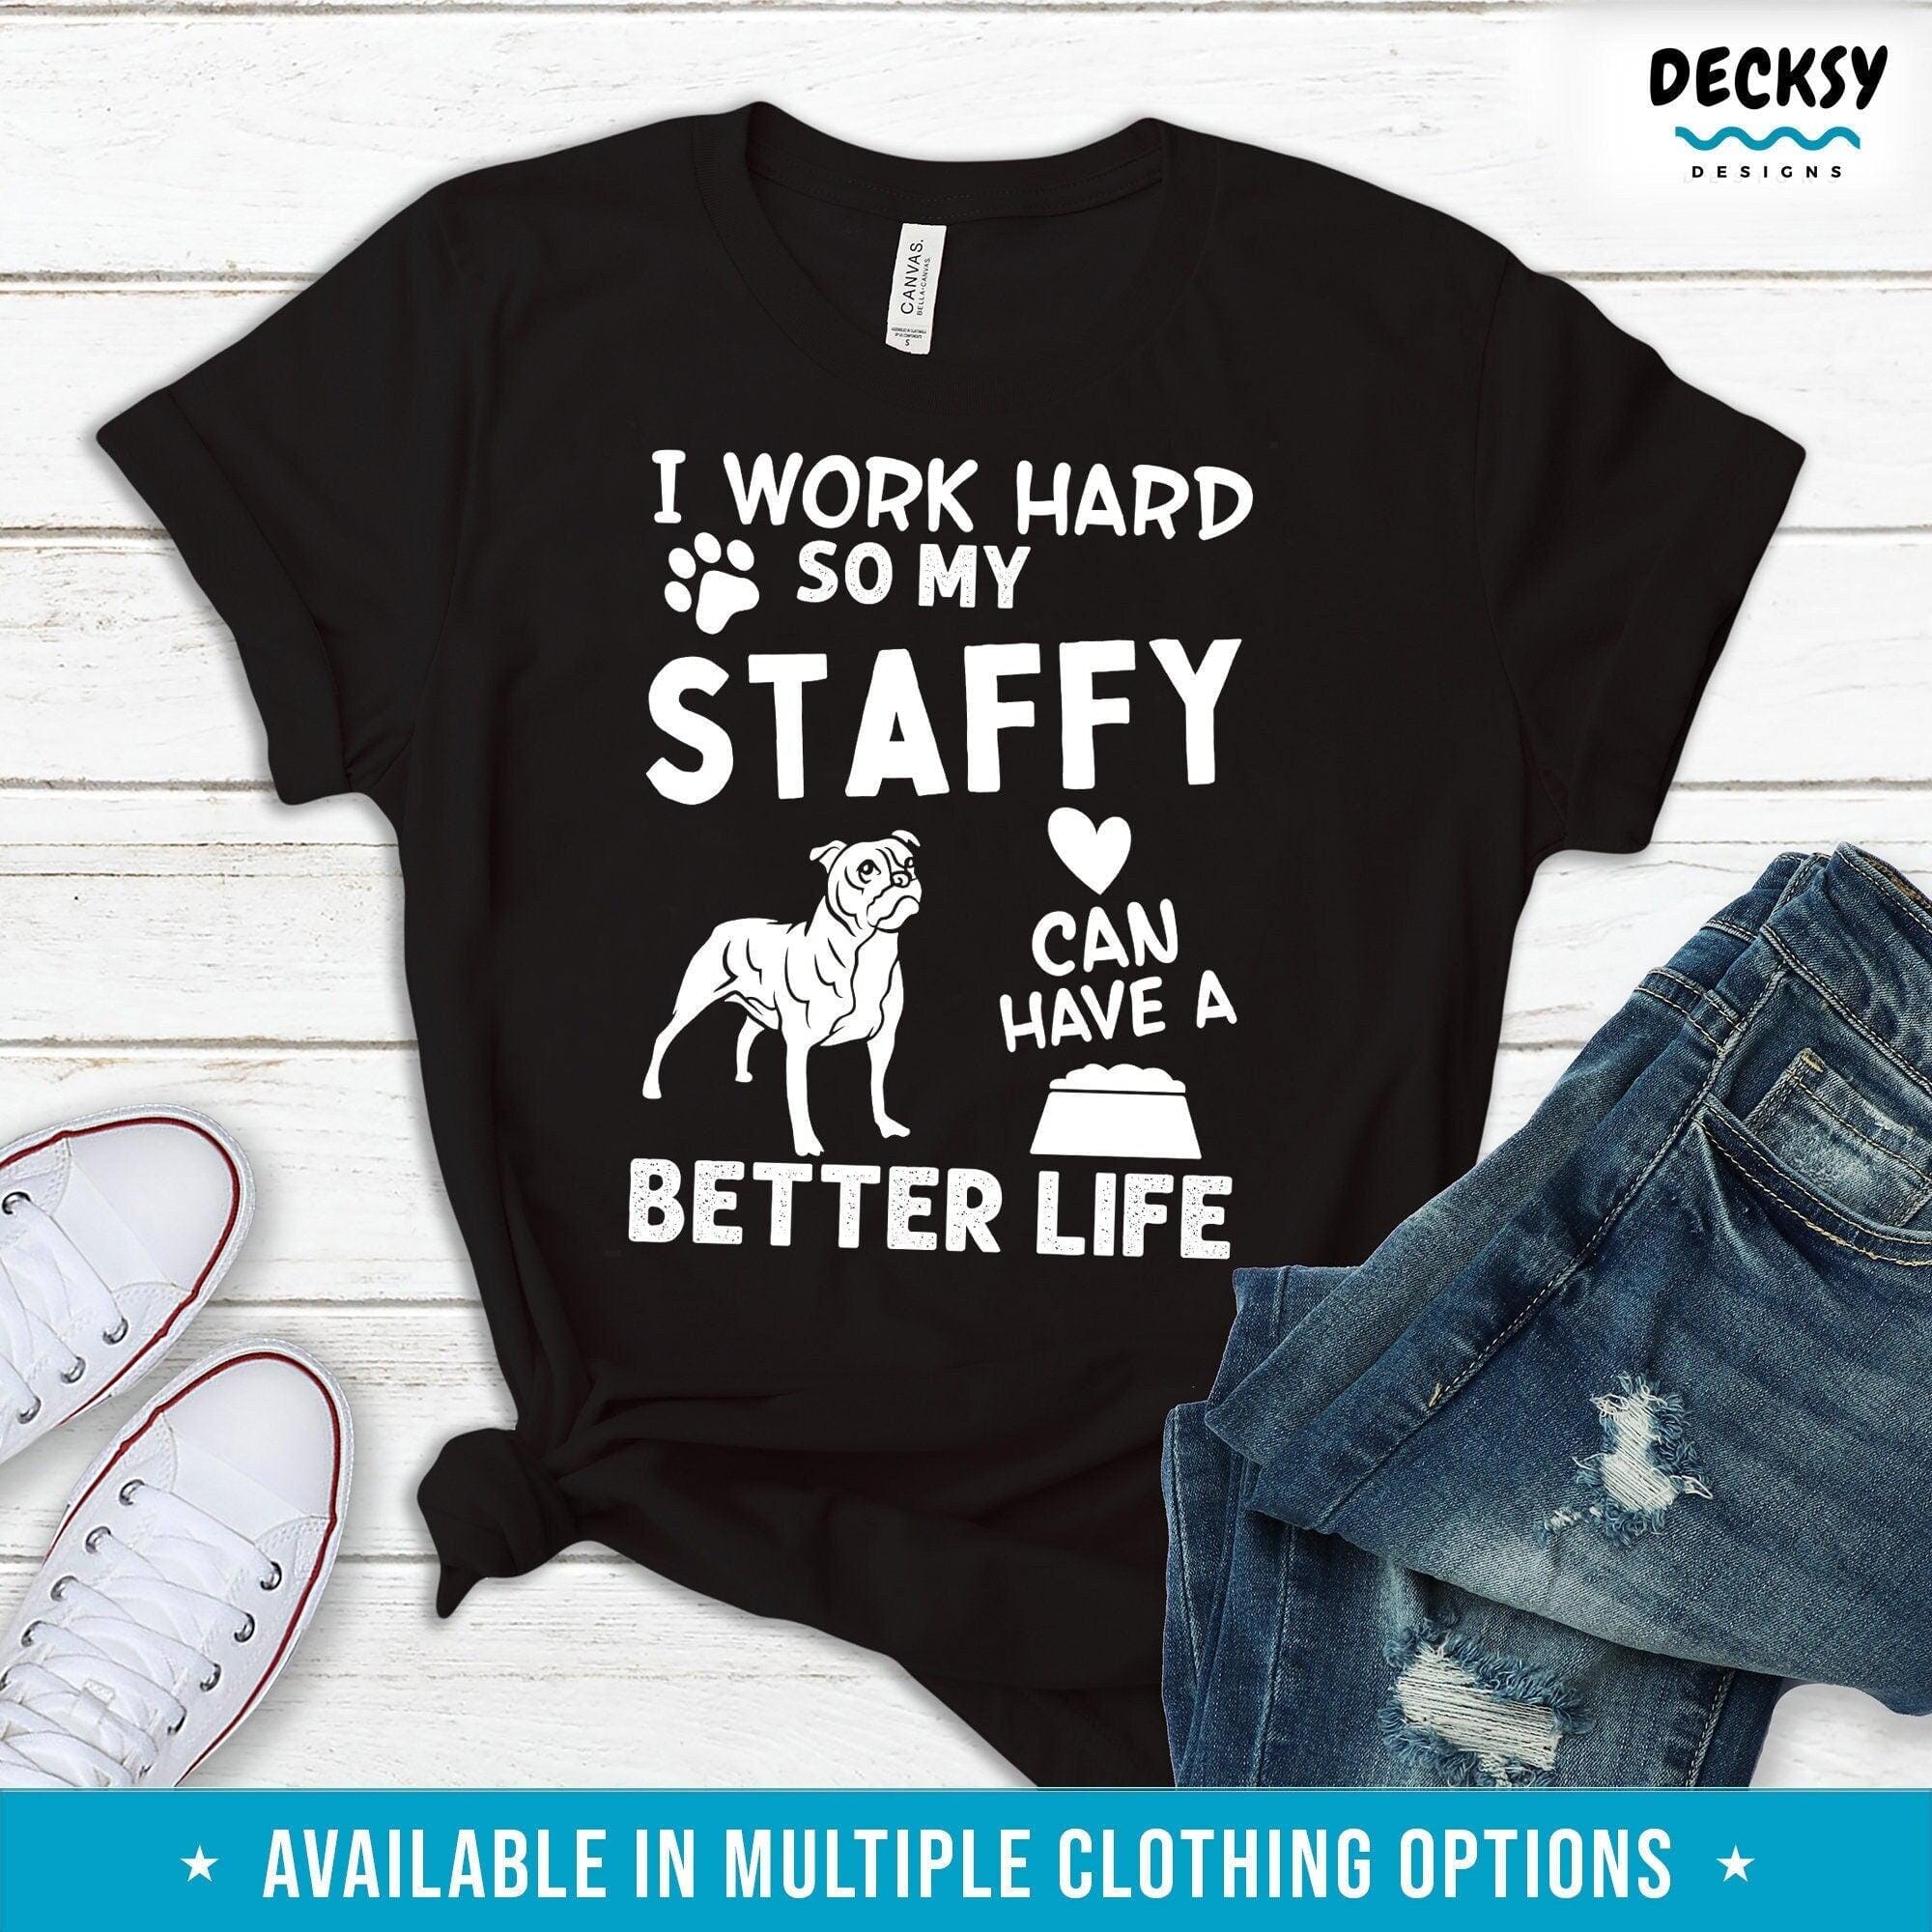 Staffy Owner Shirt, Staffordshire Bull Terrier Gift-Clothing:Gender-Neutral Adult Clothing:Tops & Tees:T-shirts:Graphic Tees-DecksyDesigns